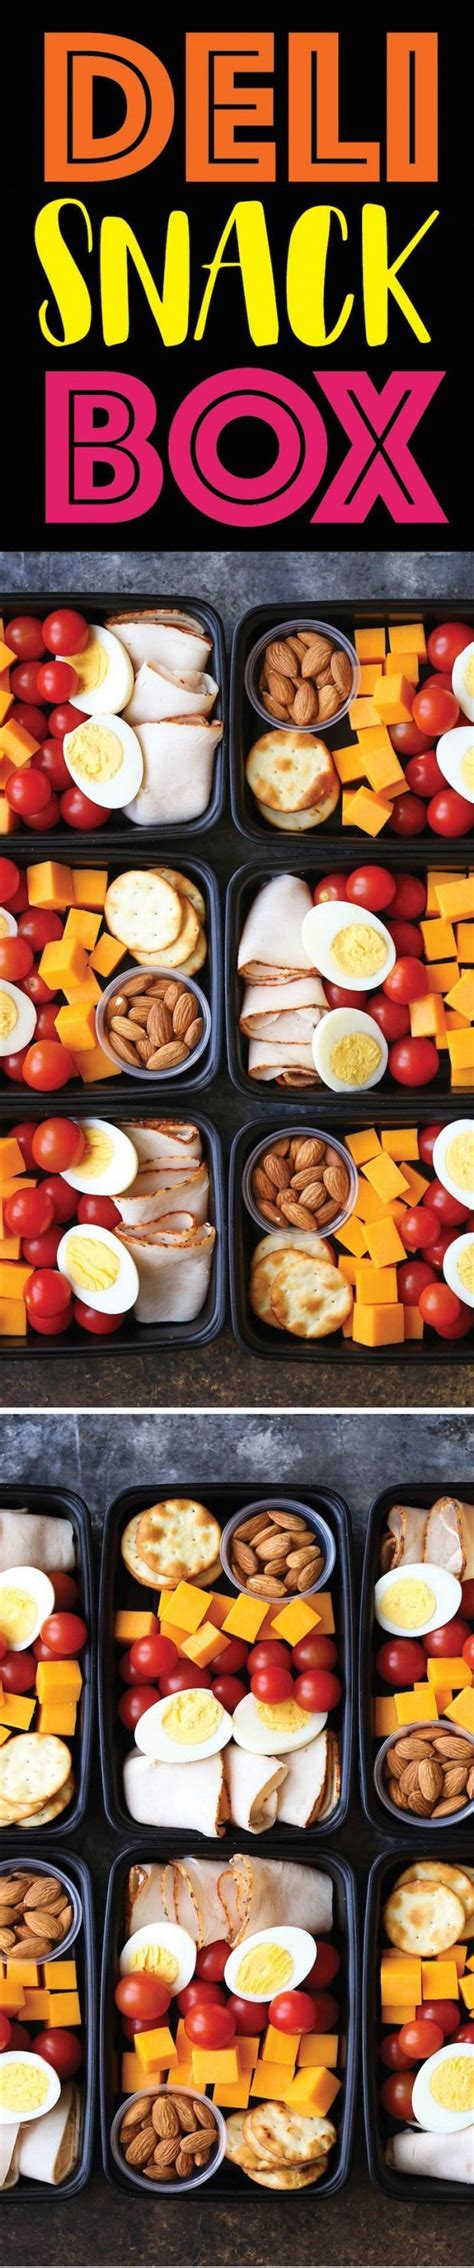 Deli Snack Box Prep For The Week Ahead With These Healthy Budget